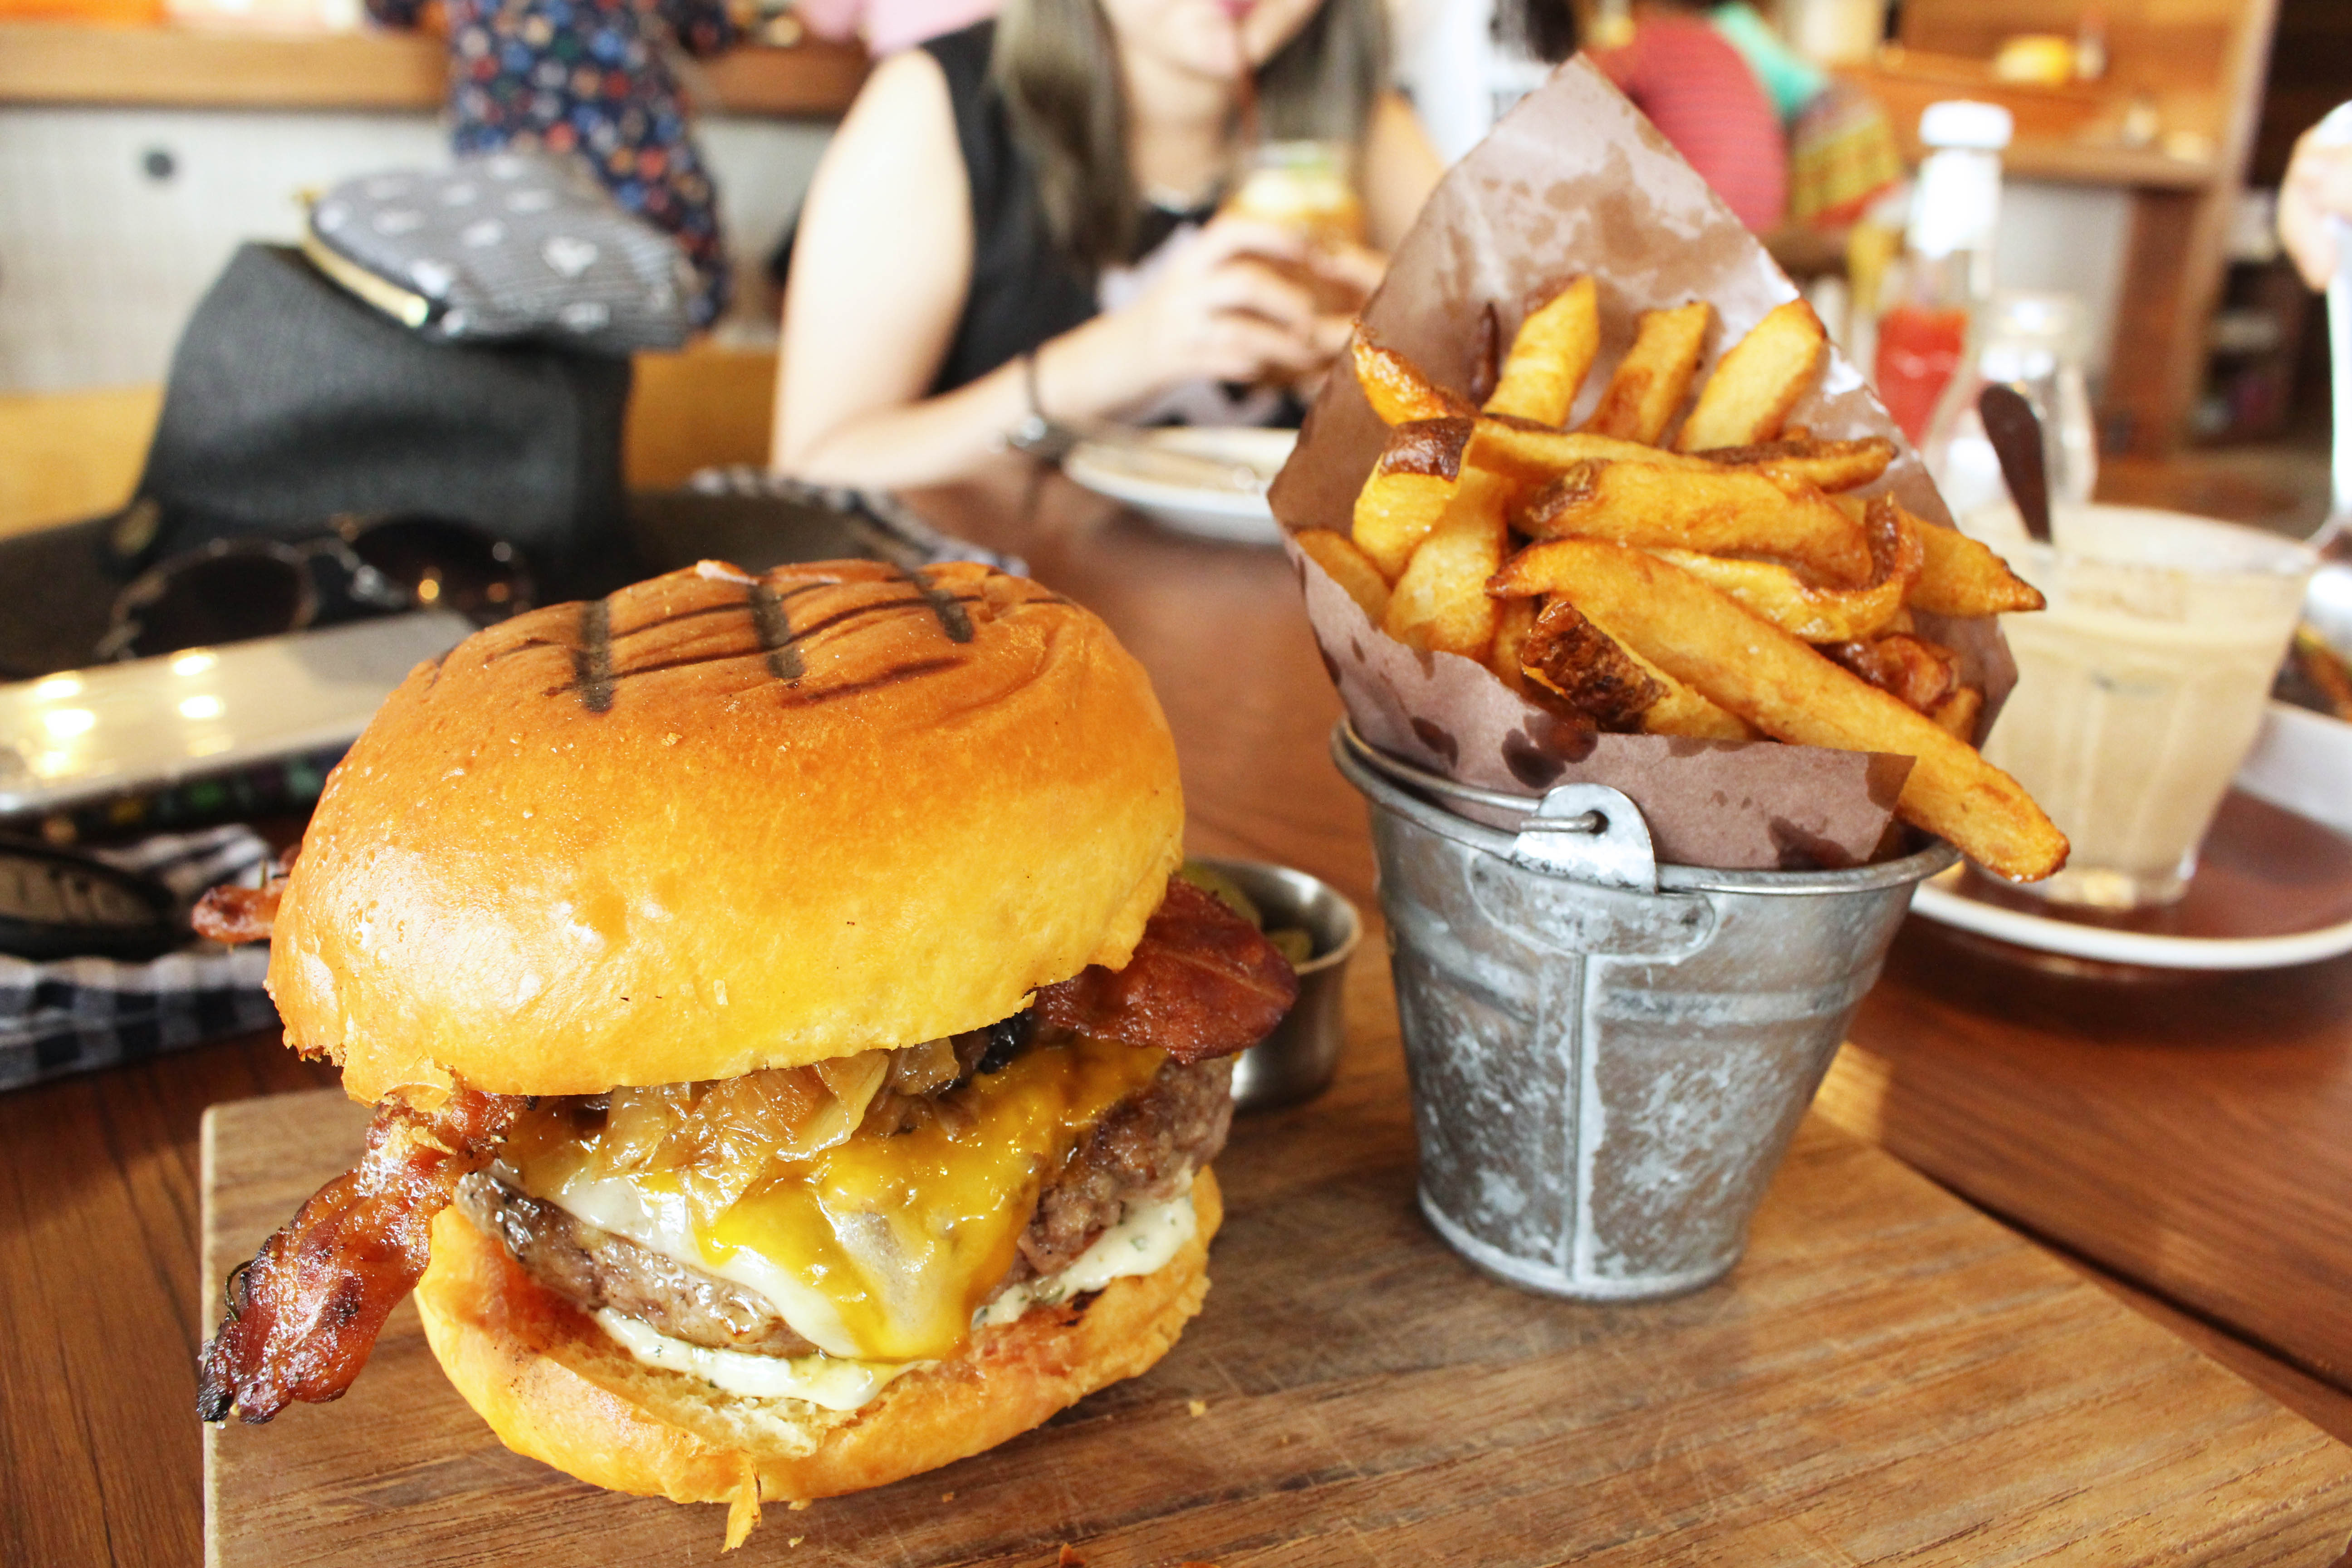 A mouthwatering Johnnys Burger served alongside thick-cut fries at Roast, which came up to around 18SGD